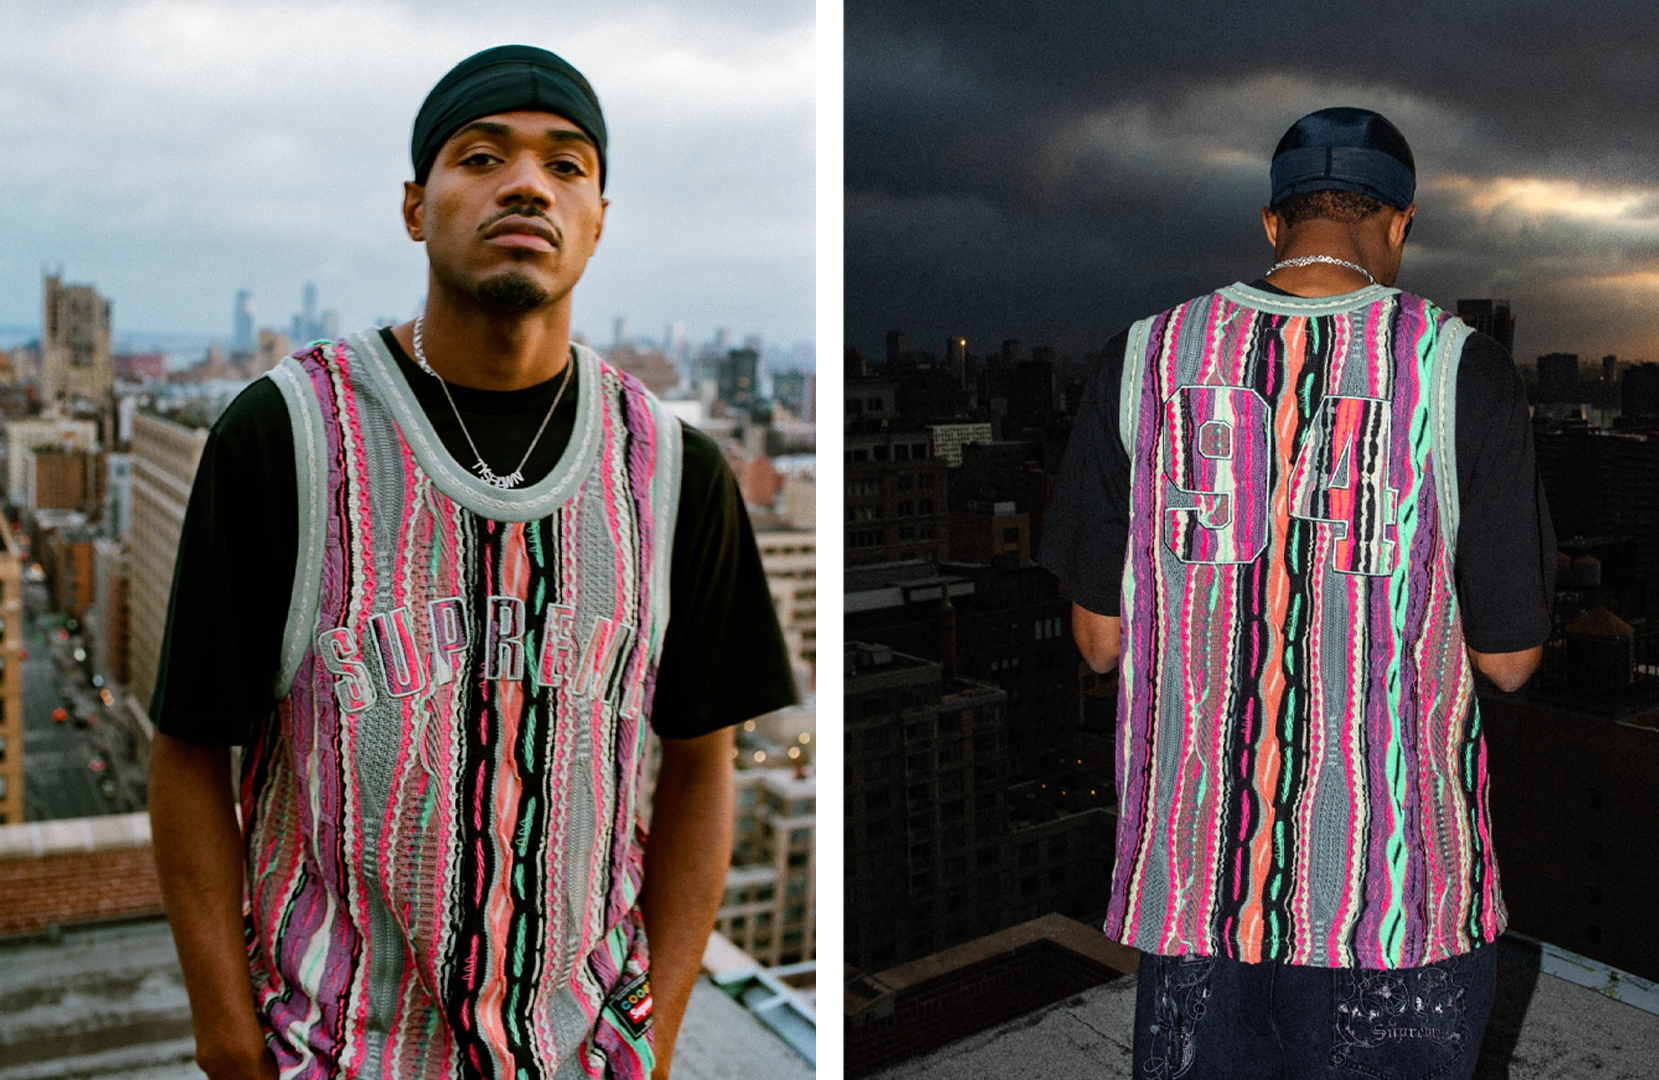 Supreme Team Up with Iconic COOGI Knitwear This Week - SLN Official